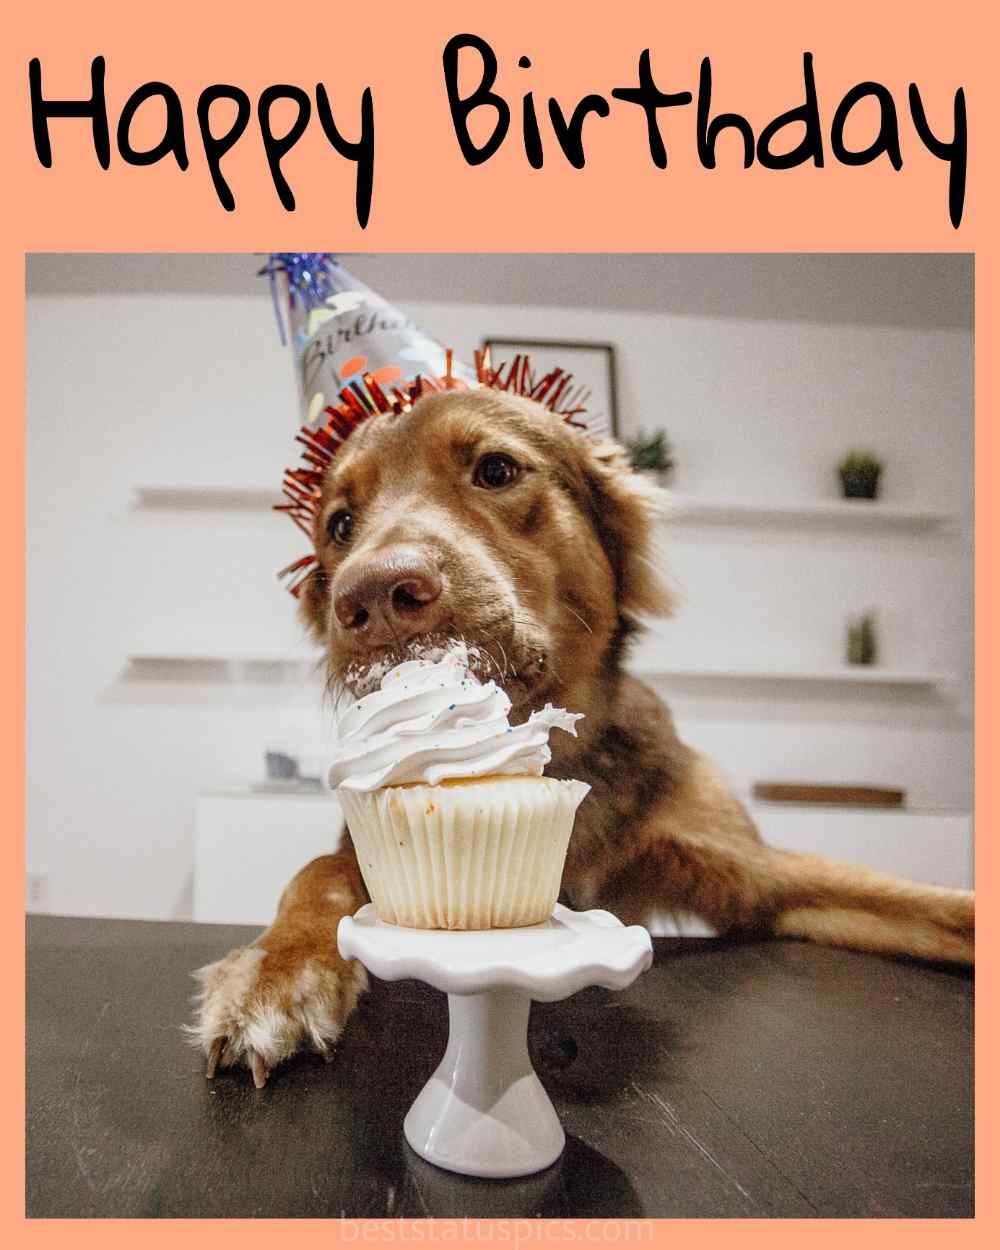 happy birthday cute dog image and card for cousin, niece and friend